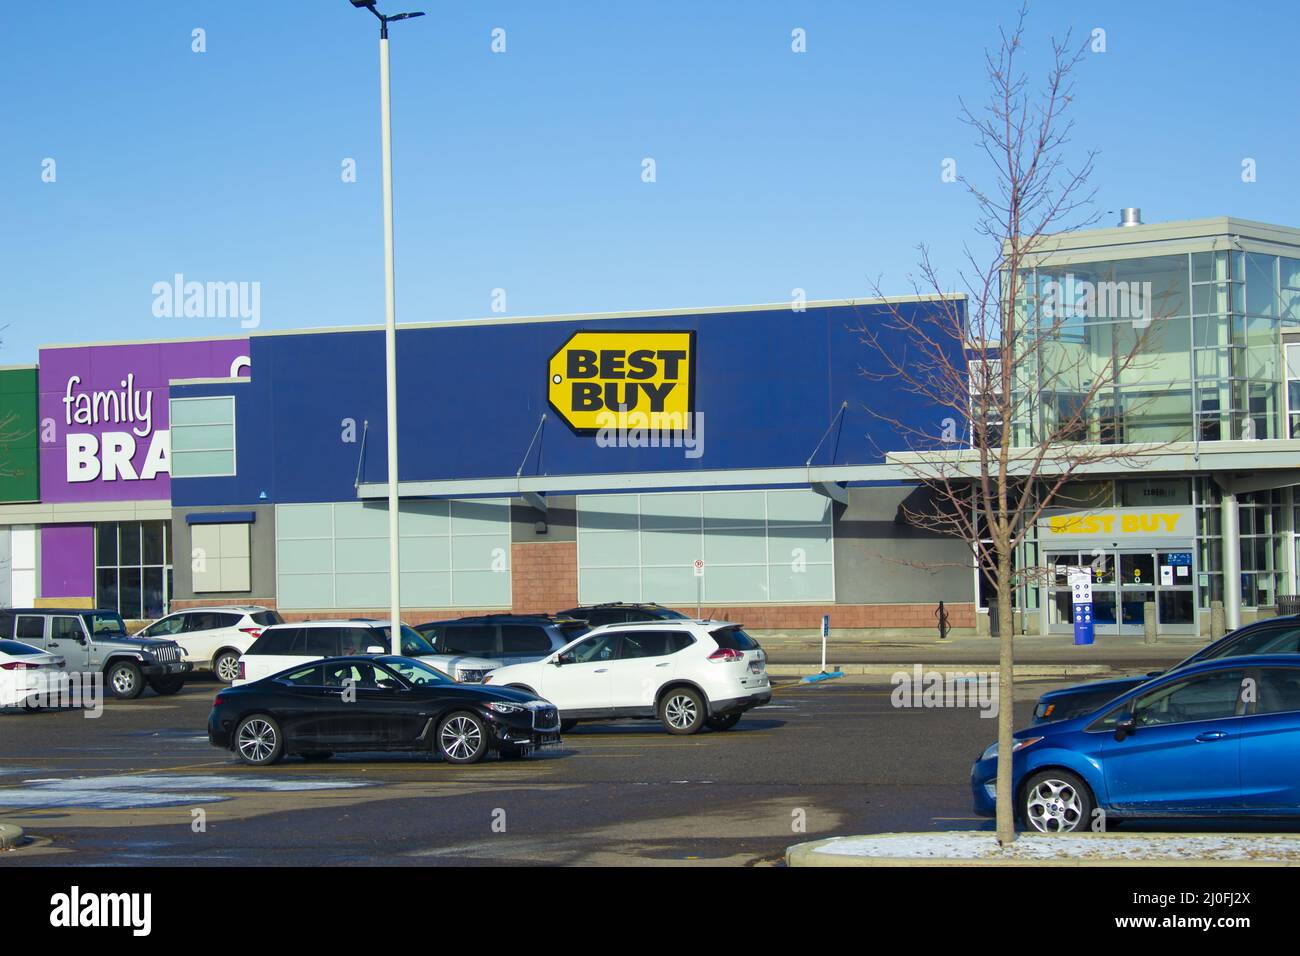 Calgary Alberta, Canada. Oct 17, 2020. Best Buy is an American multinational consumer electronics retailer headquartered in Rich Stock Photo